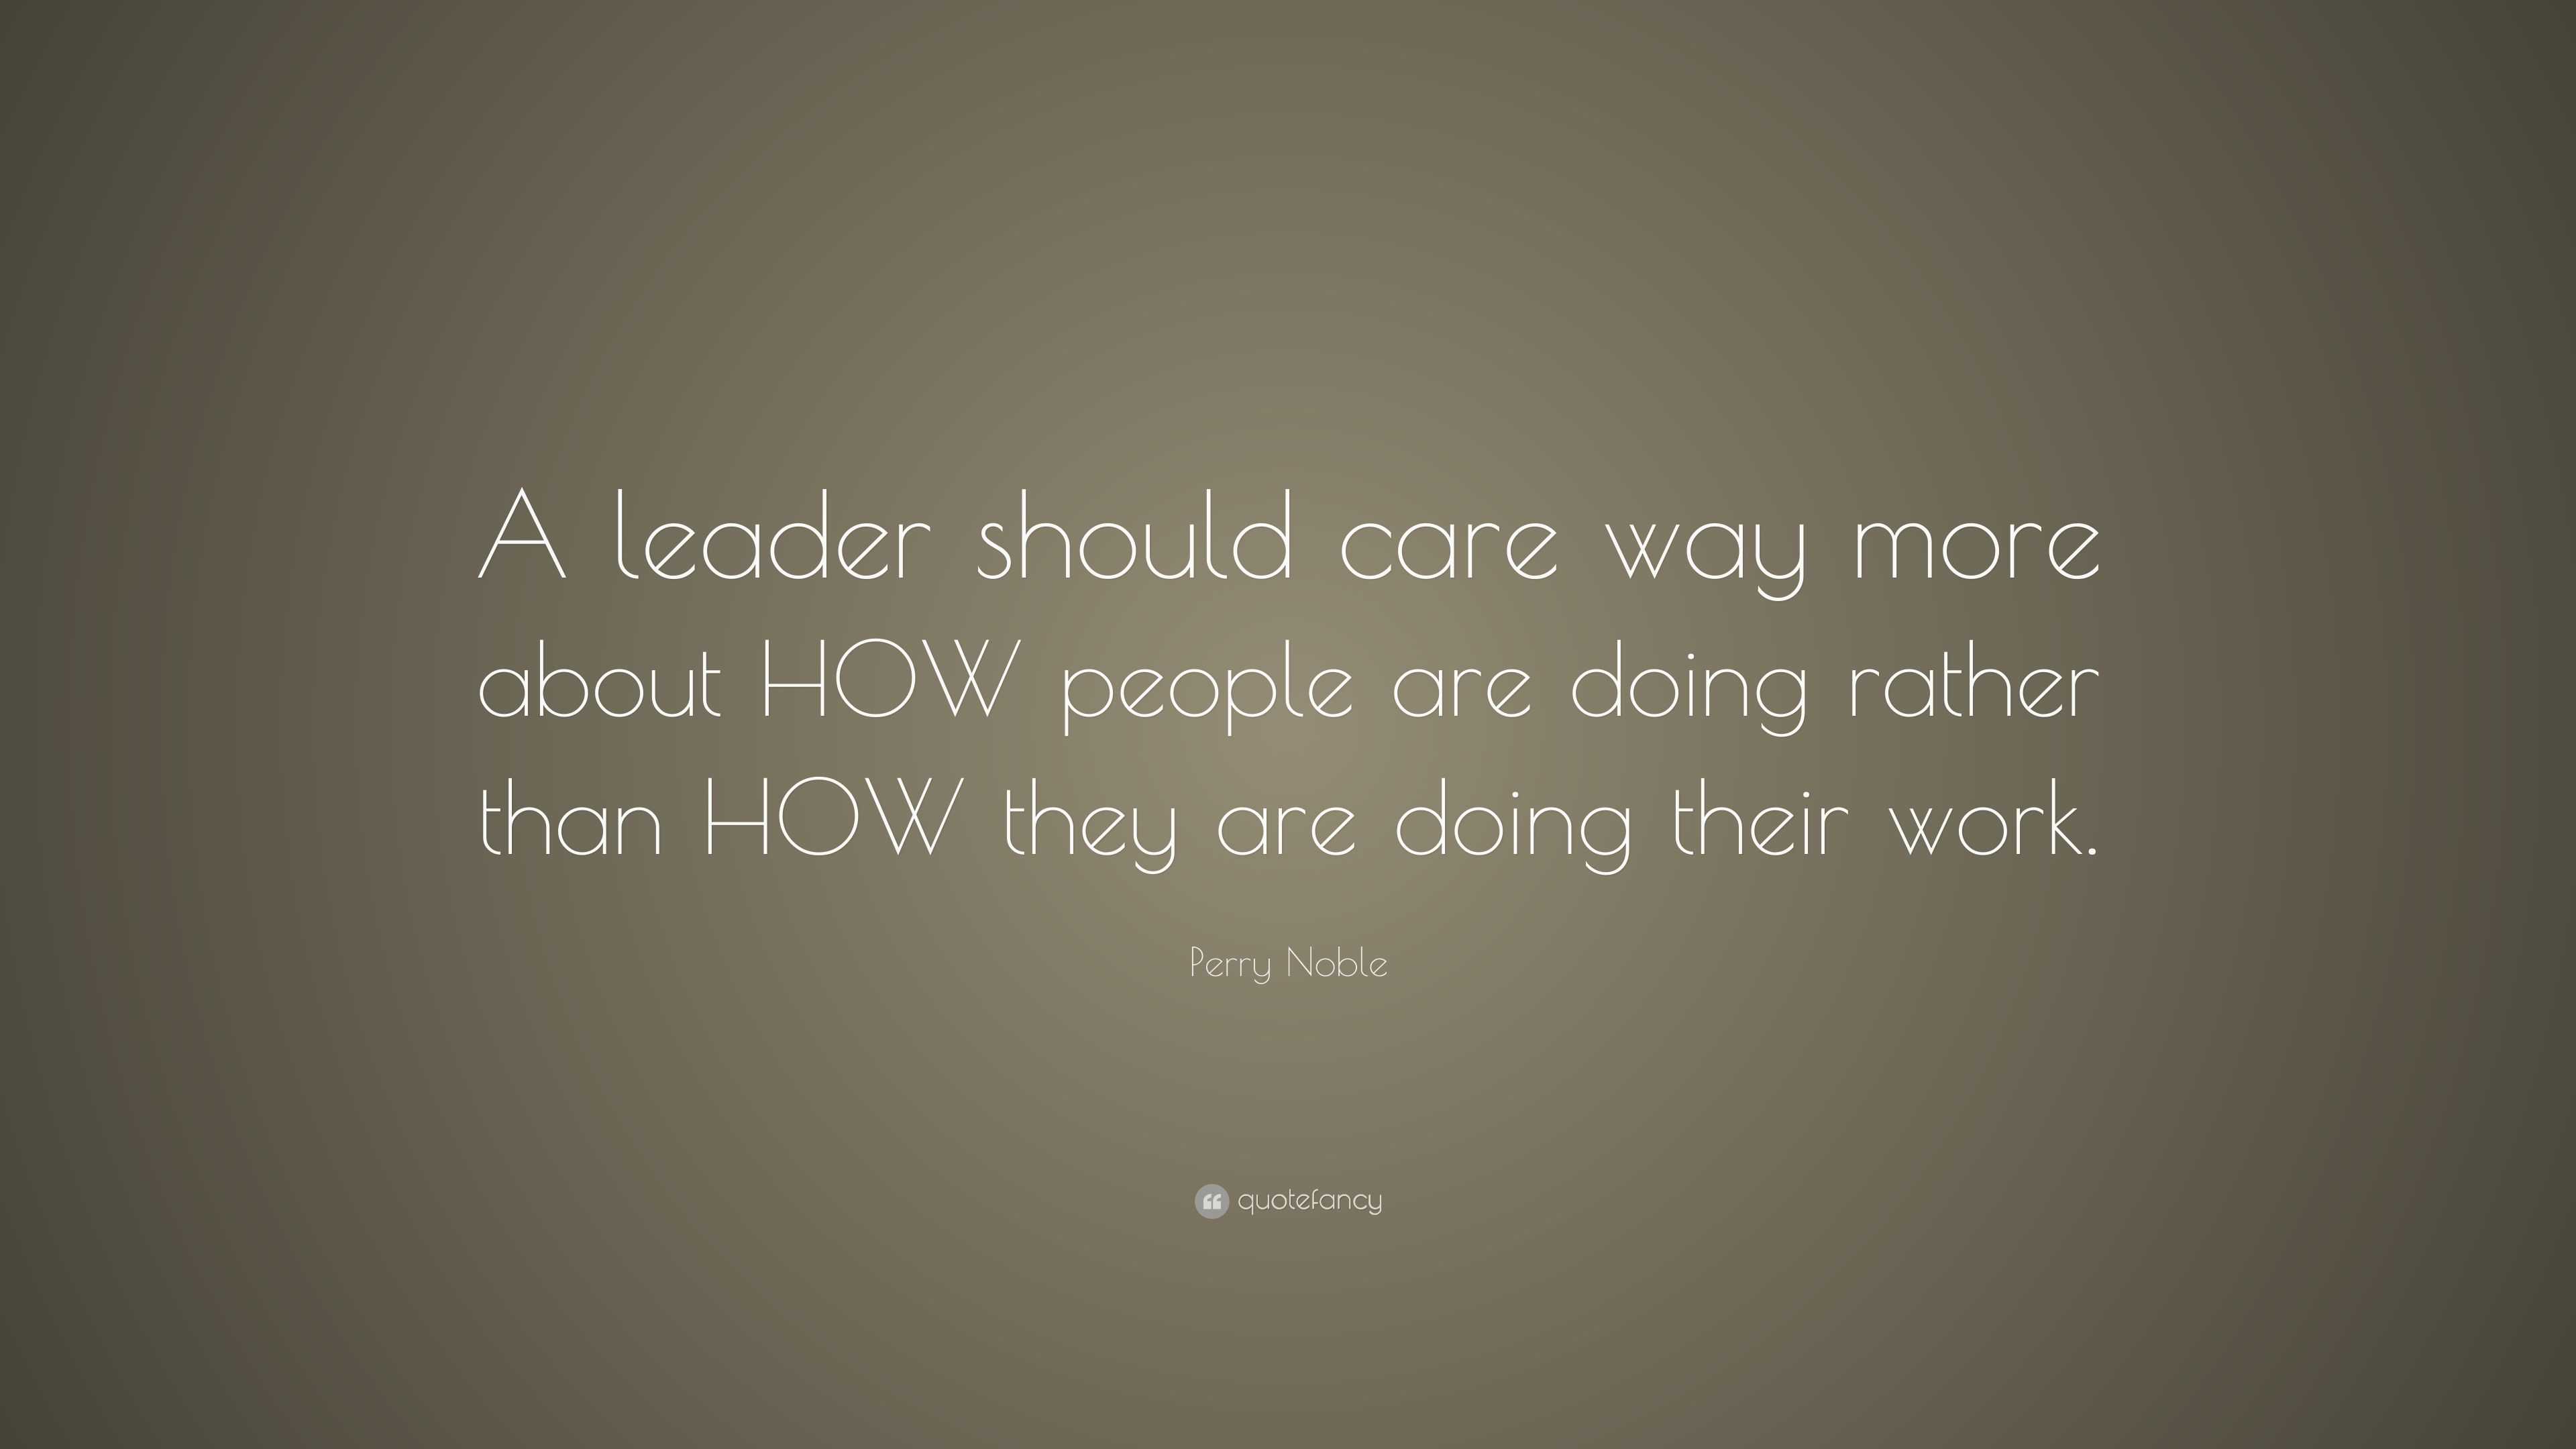 Perry Noble Quote: “A leader should care way more about HOW people are ...